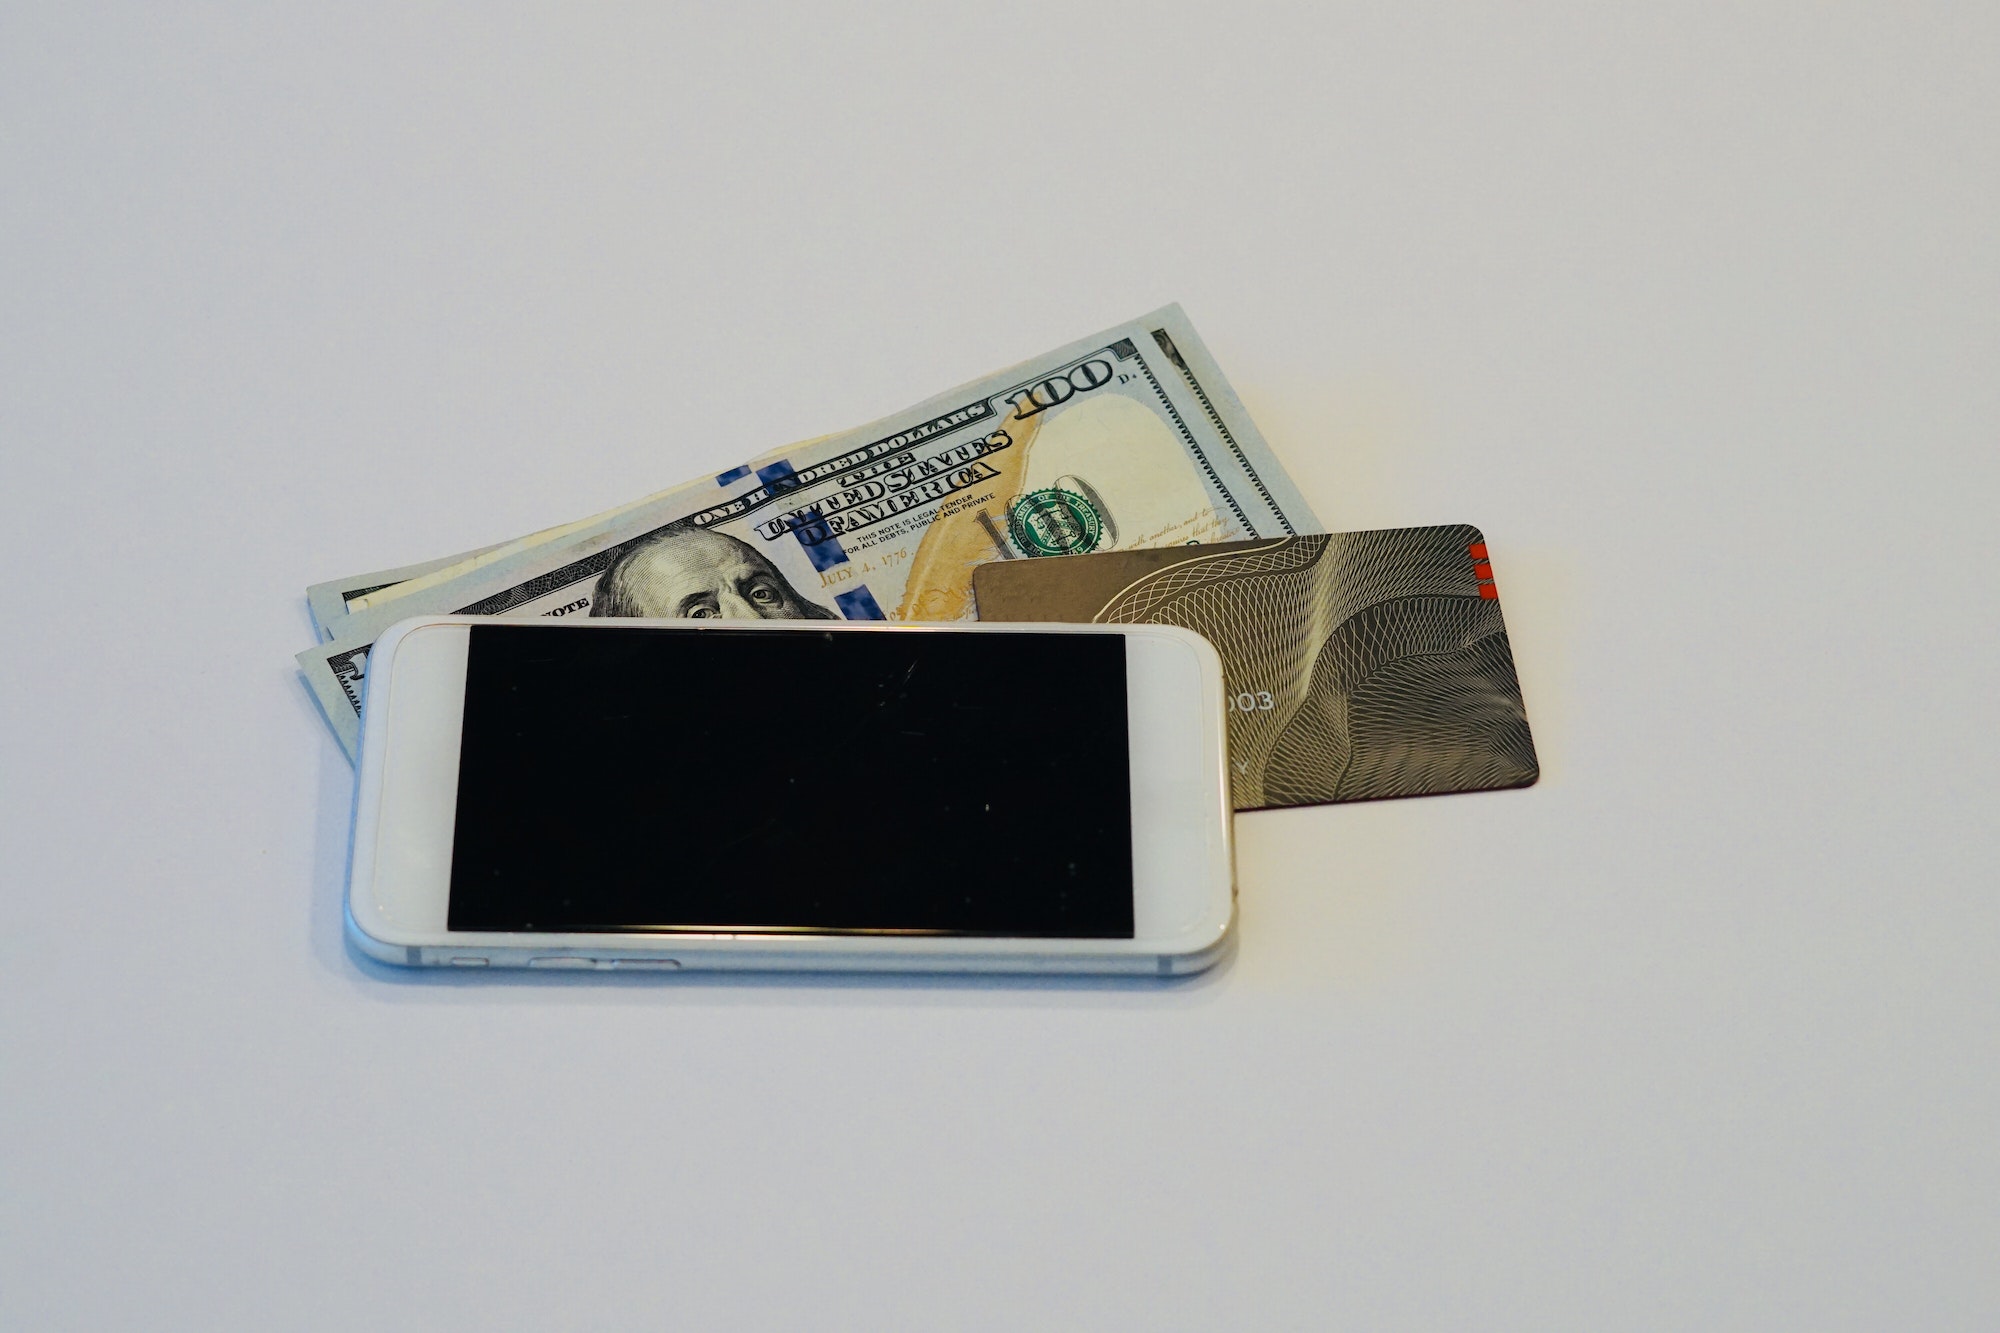 Forms of payment by cash, credit card, or digital pay methods through mobile phone